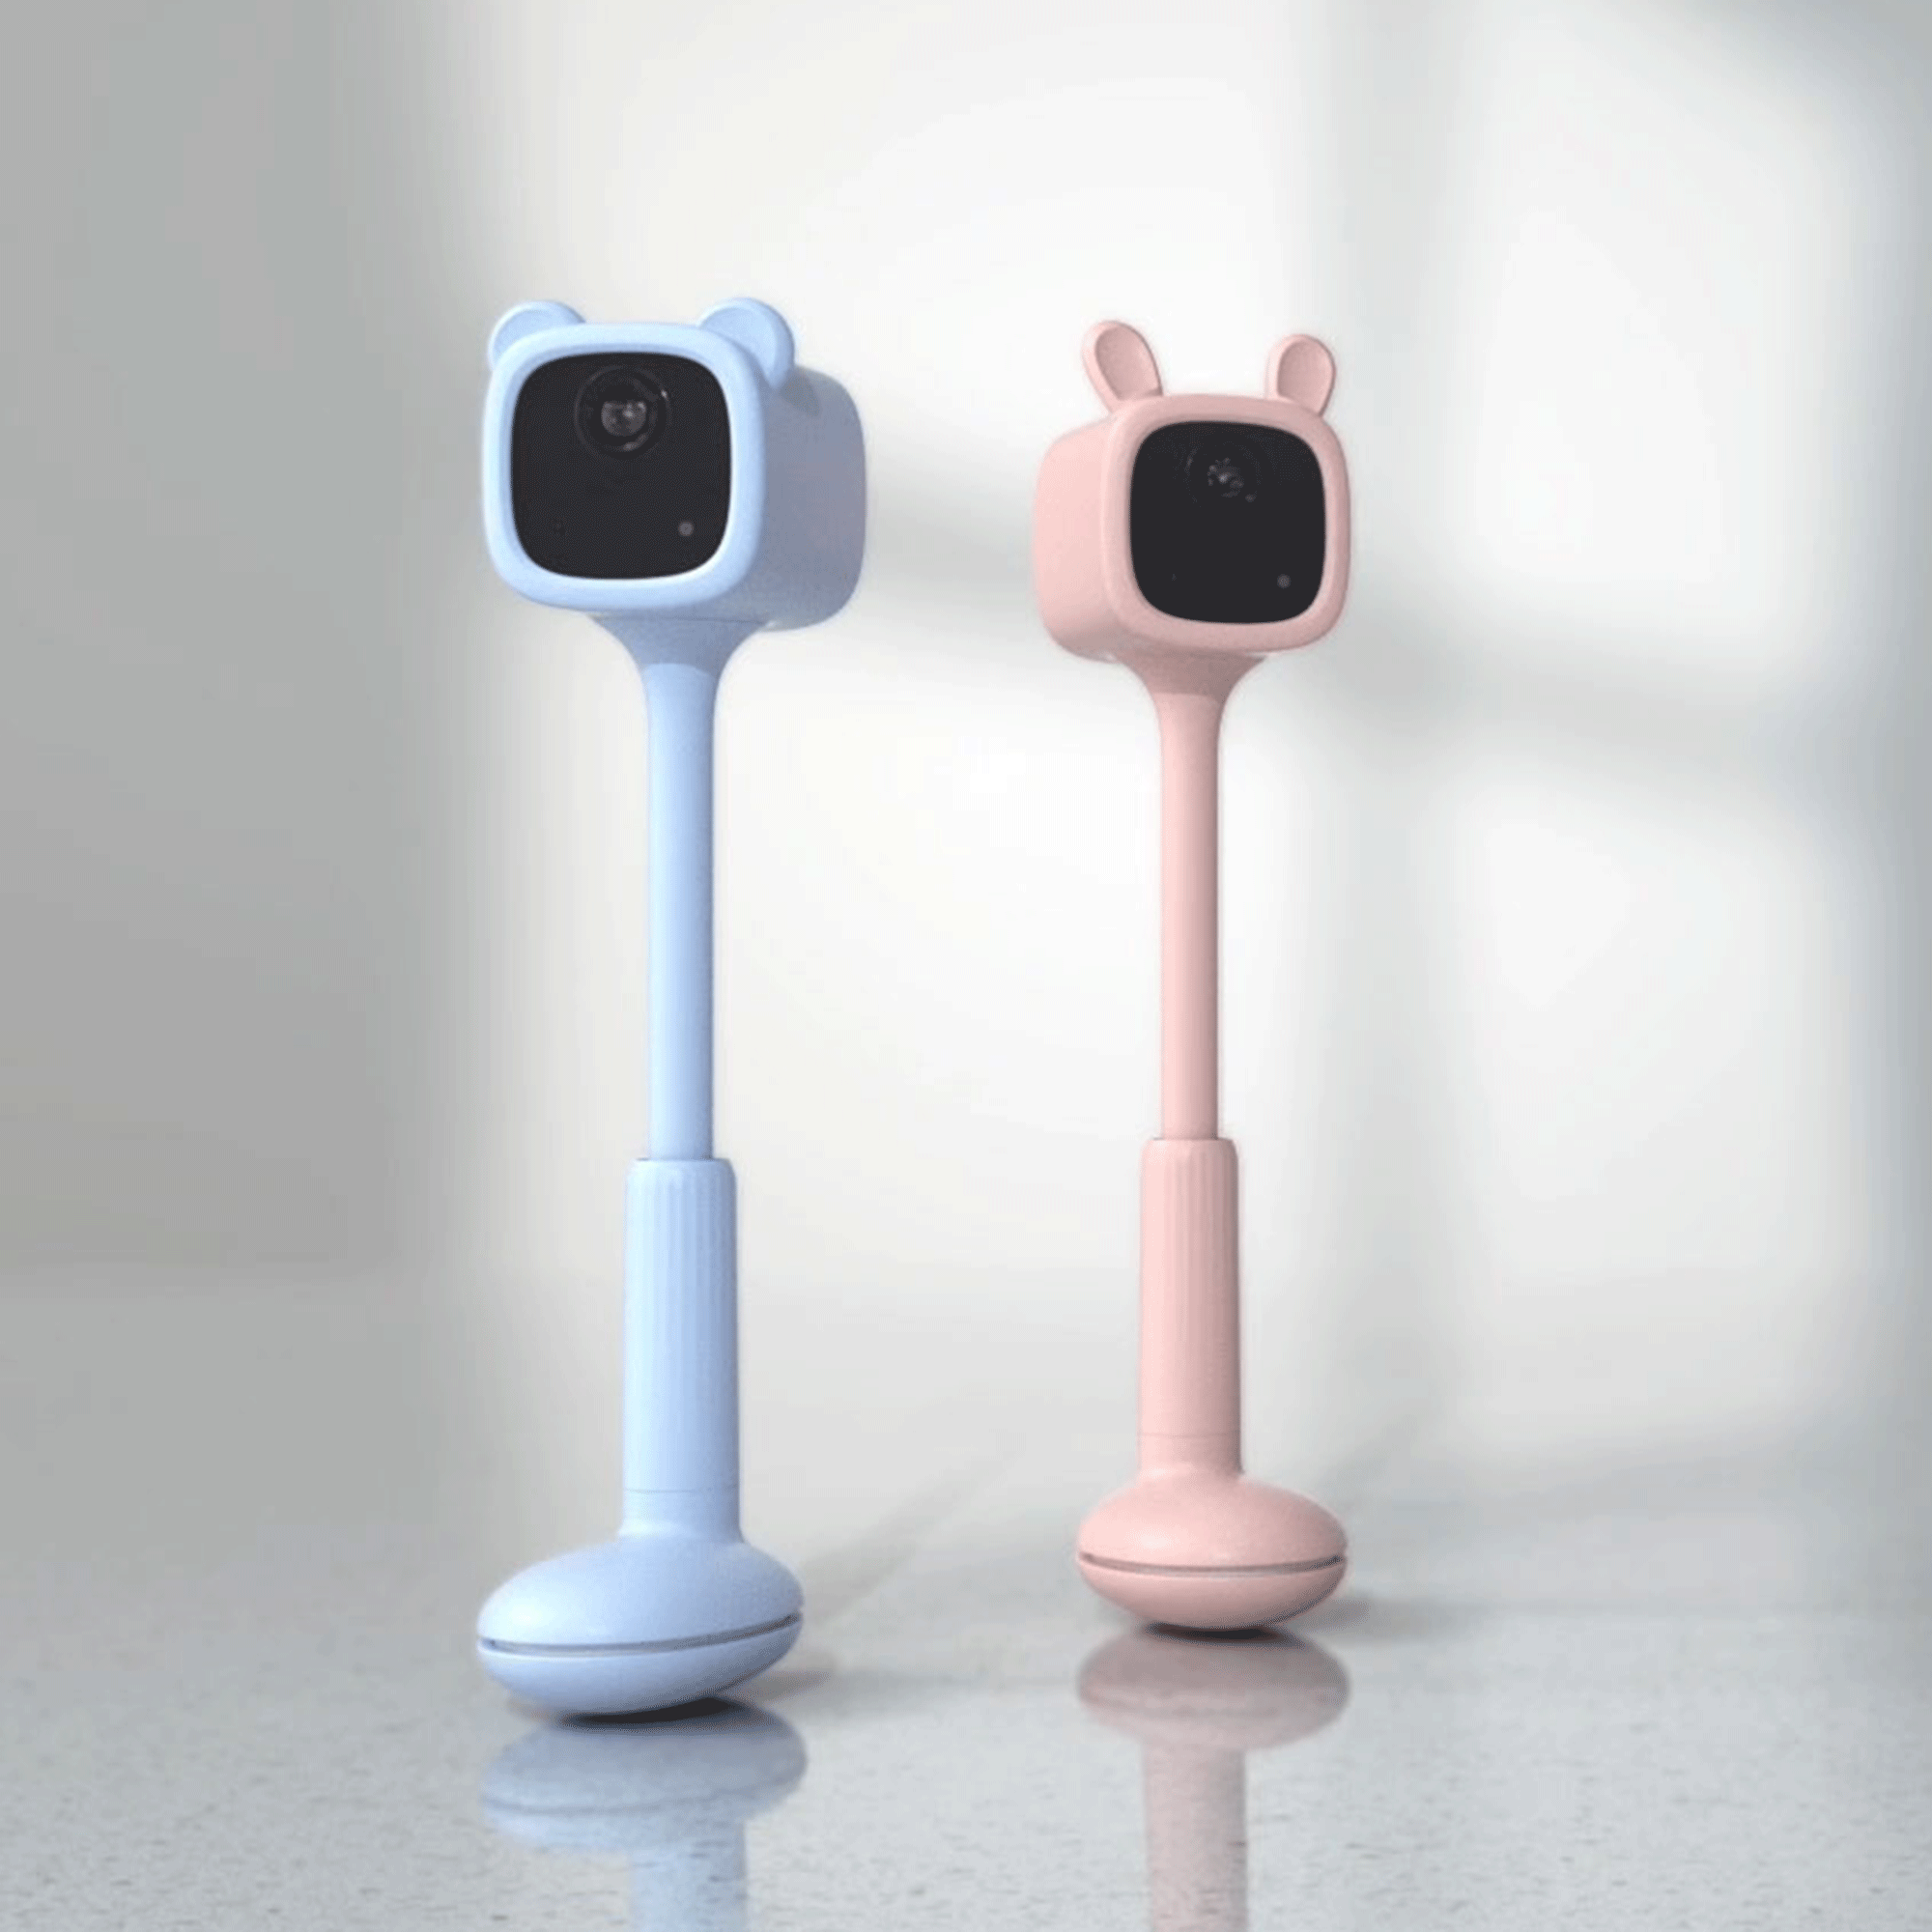 Baby camera in pink and blue cases